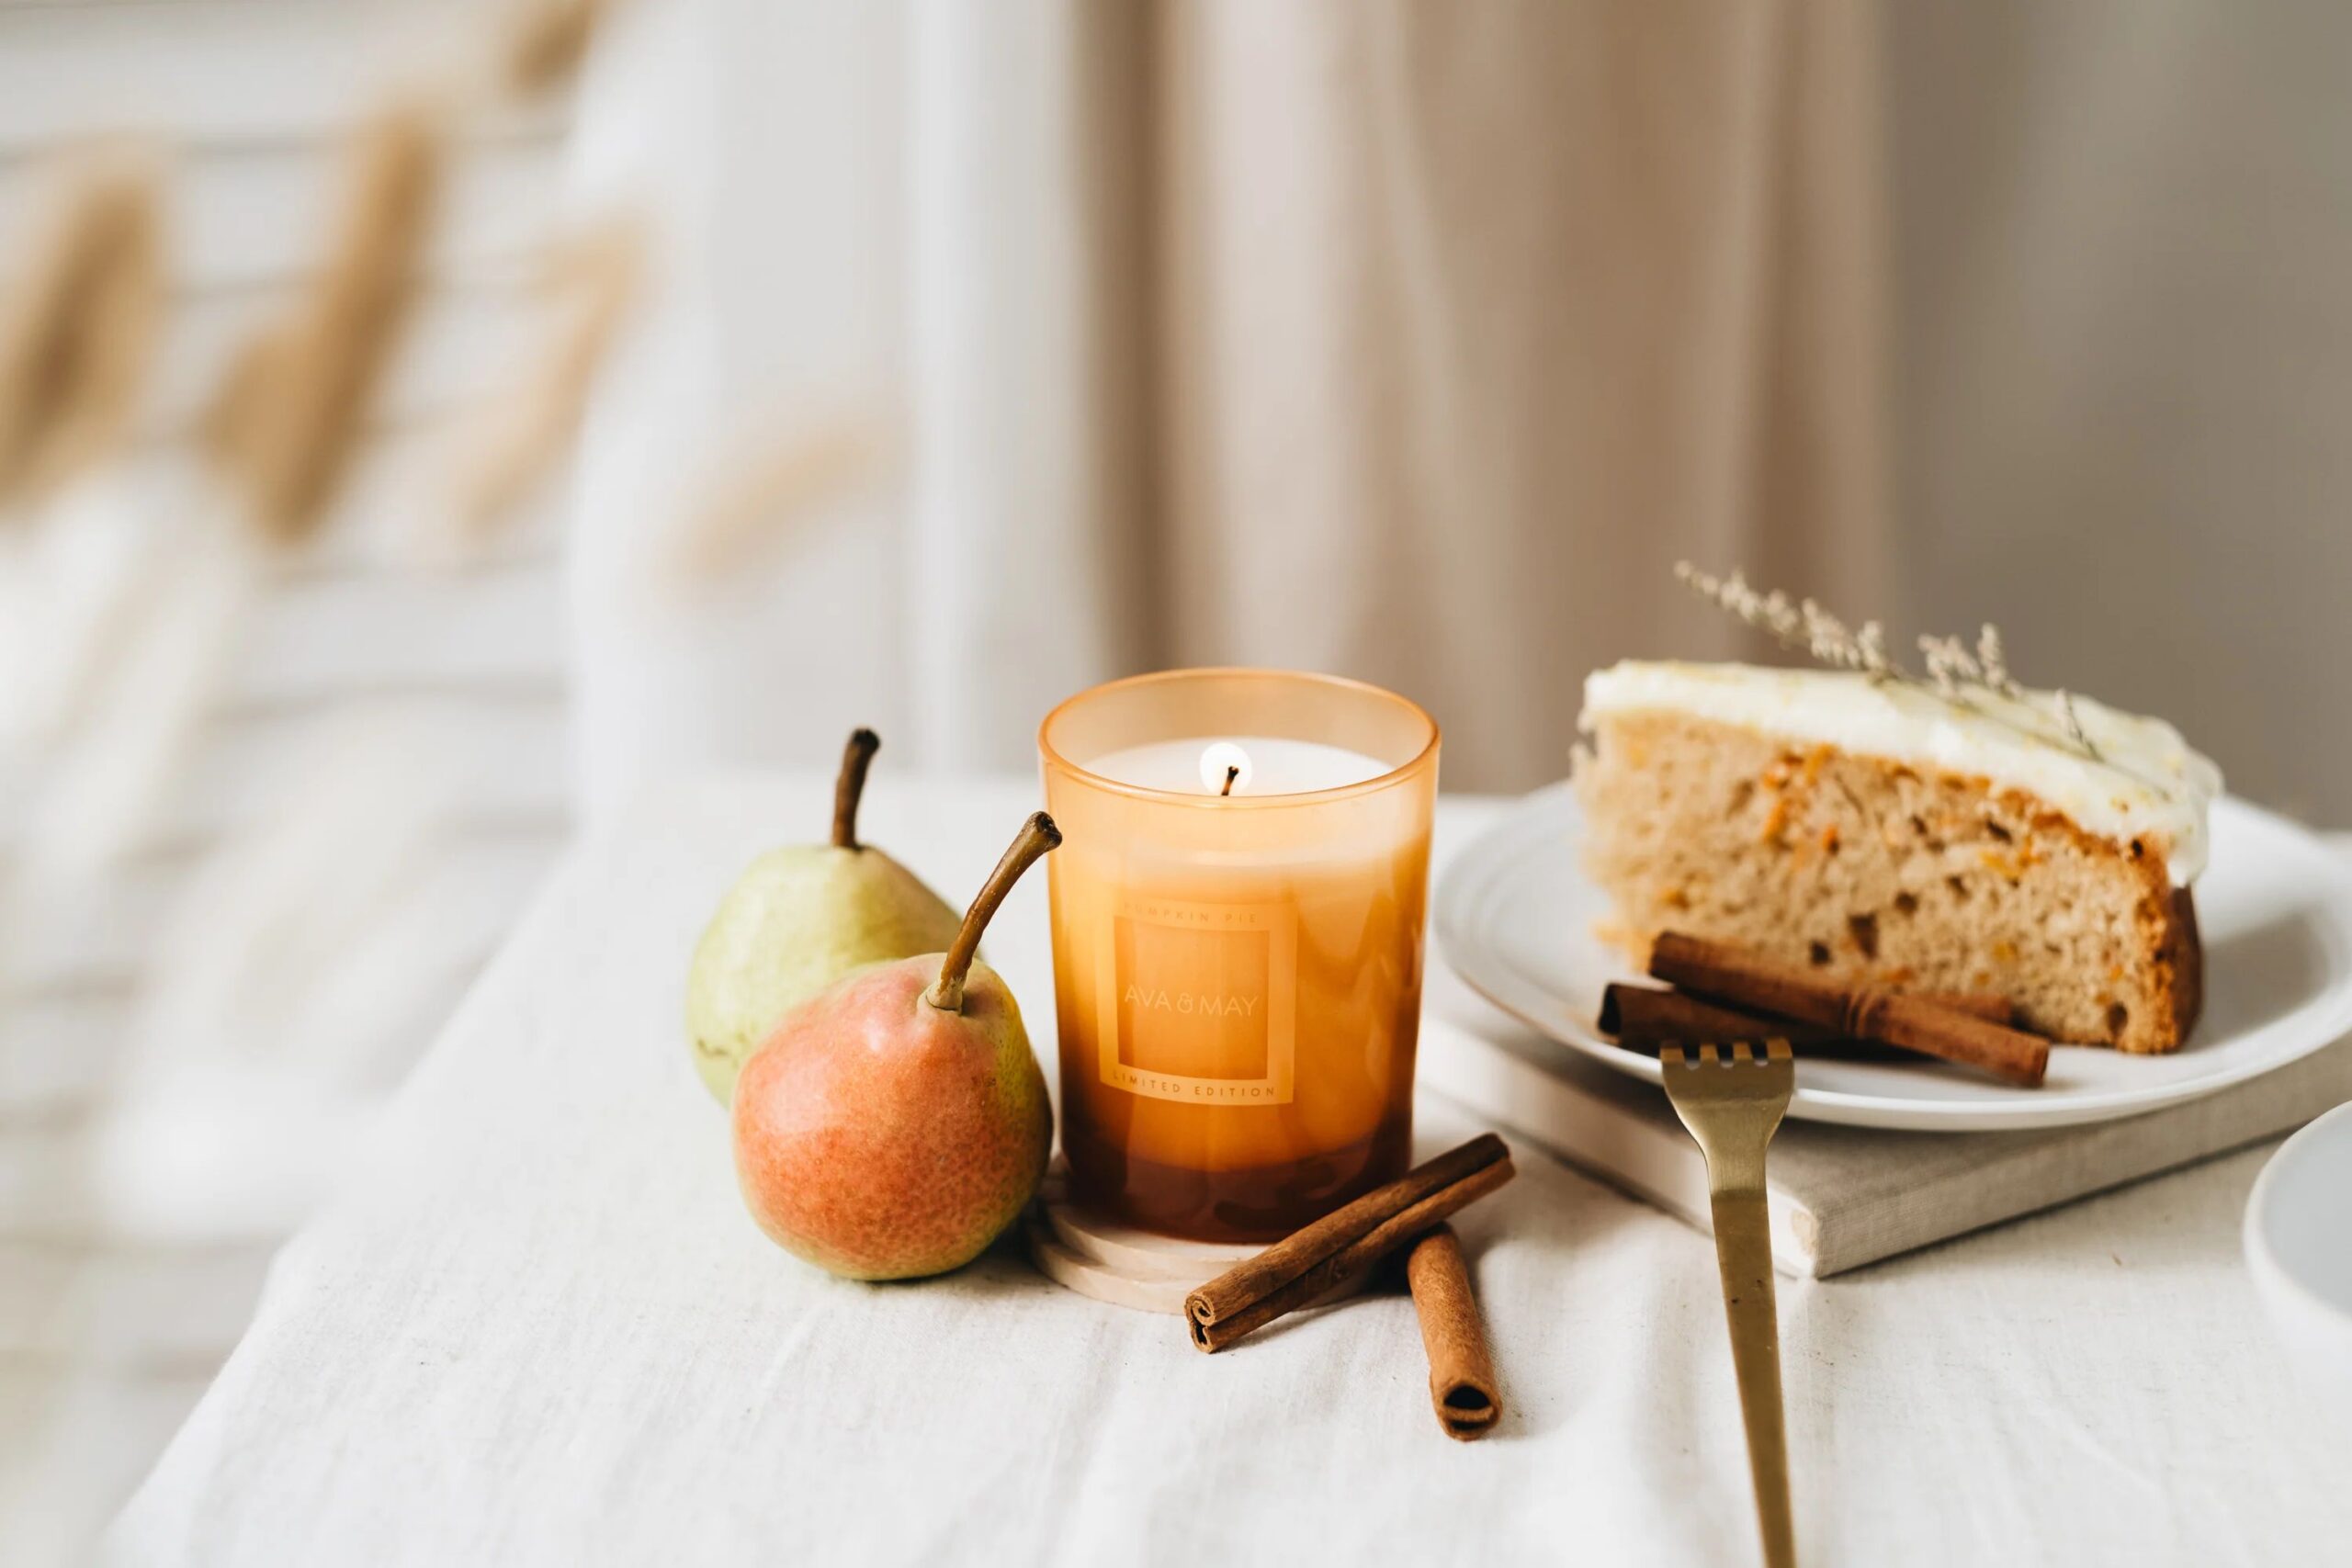   A Scented Candle With Autumnal Scents 